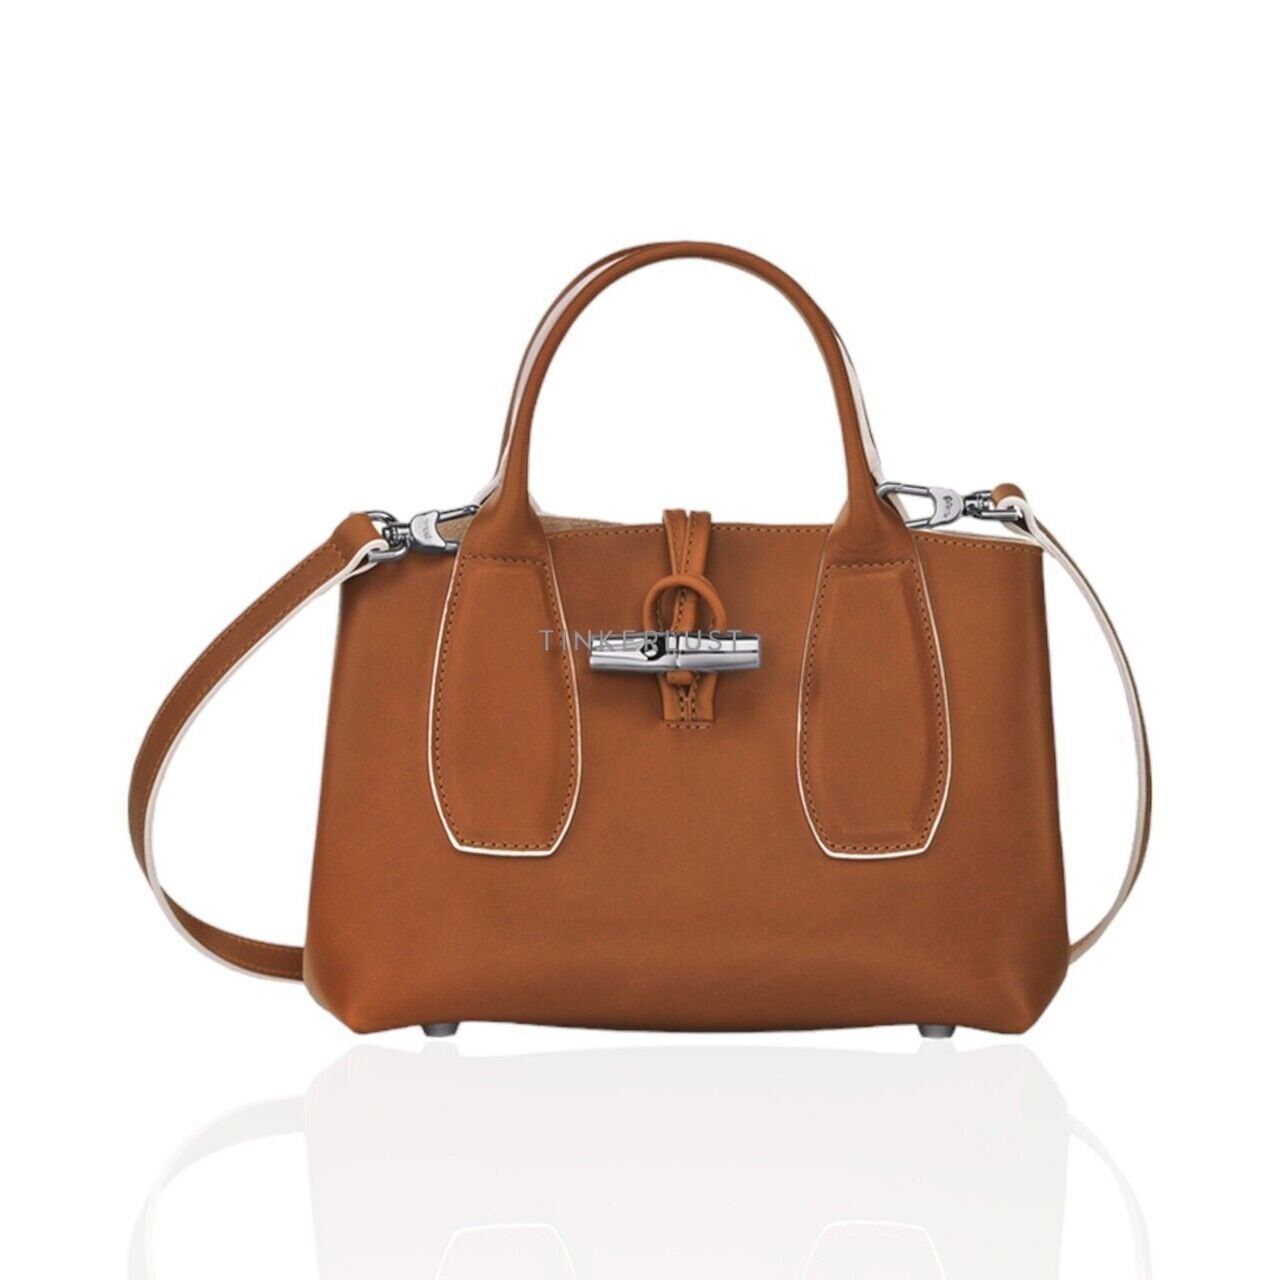 Longchamp Small Roseau in Cognac Leather with White Leaning Top Handle Satchel Bag